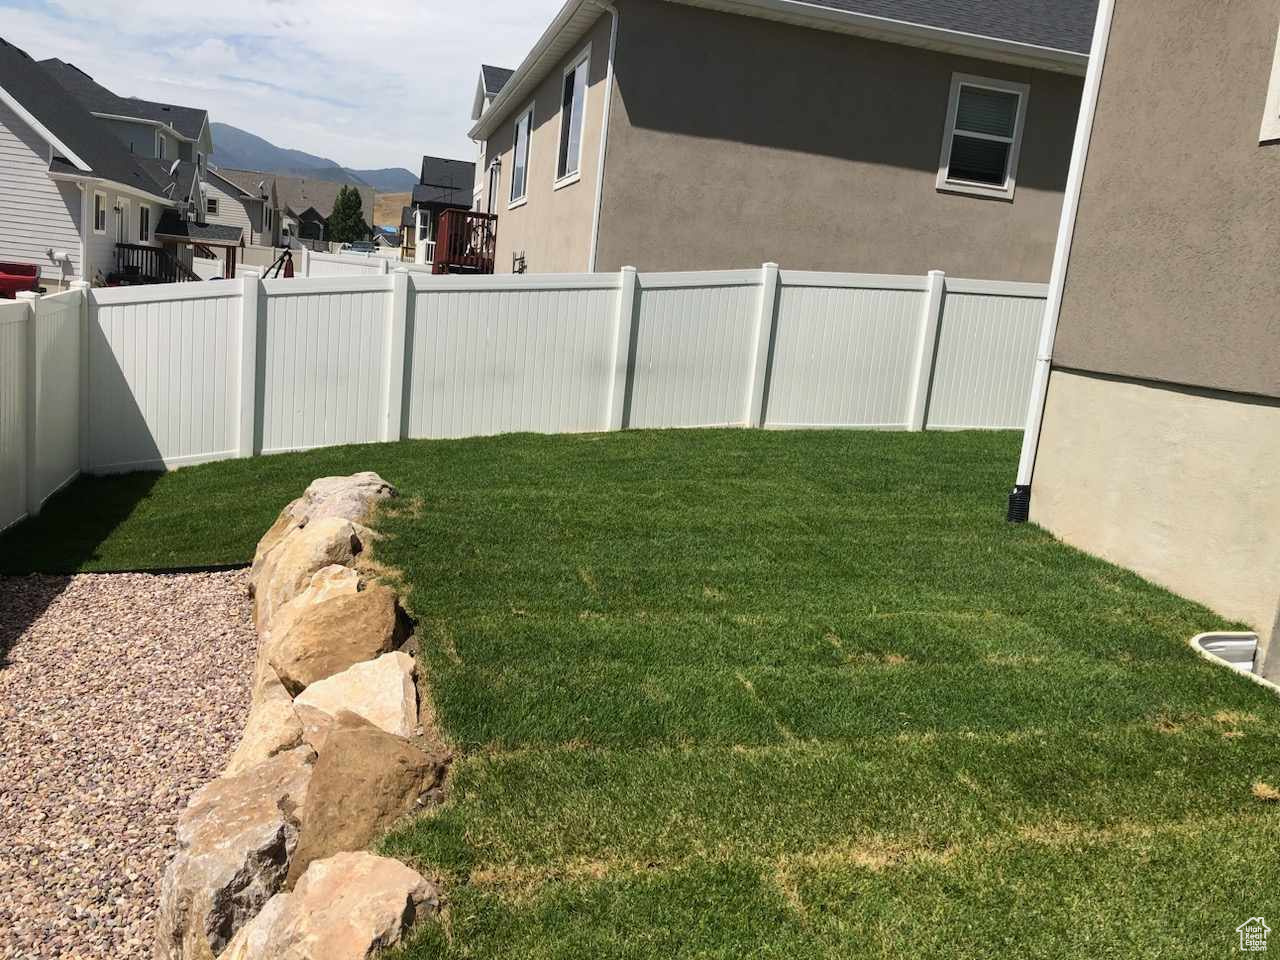 New Sod in this Section of the Back yard and New Retaining Wall